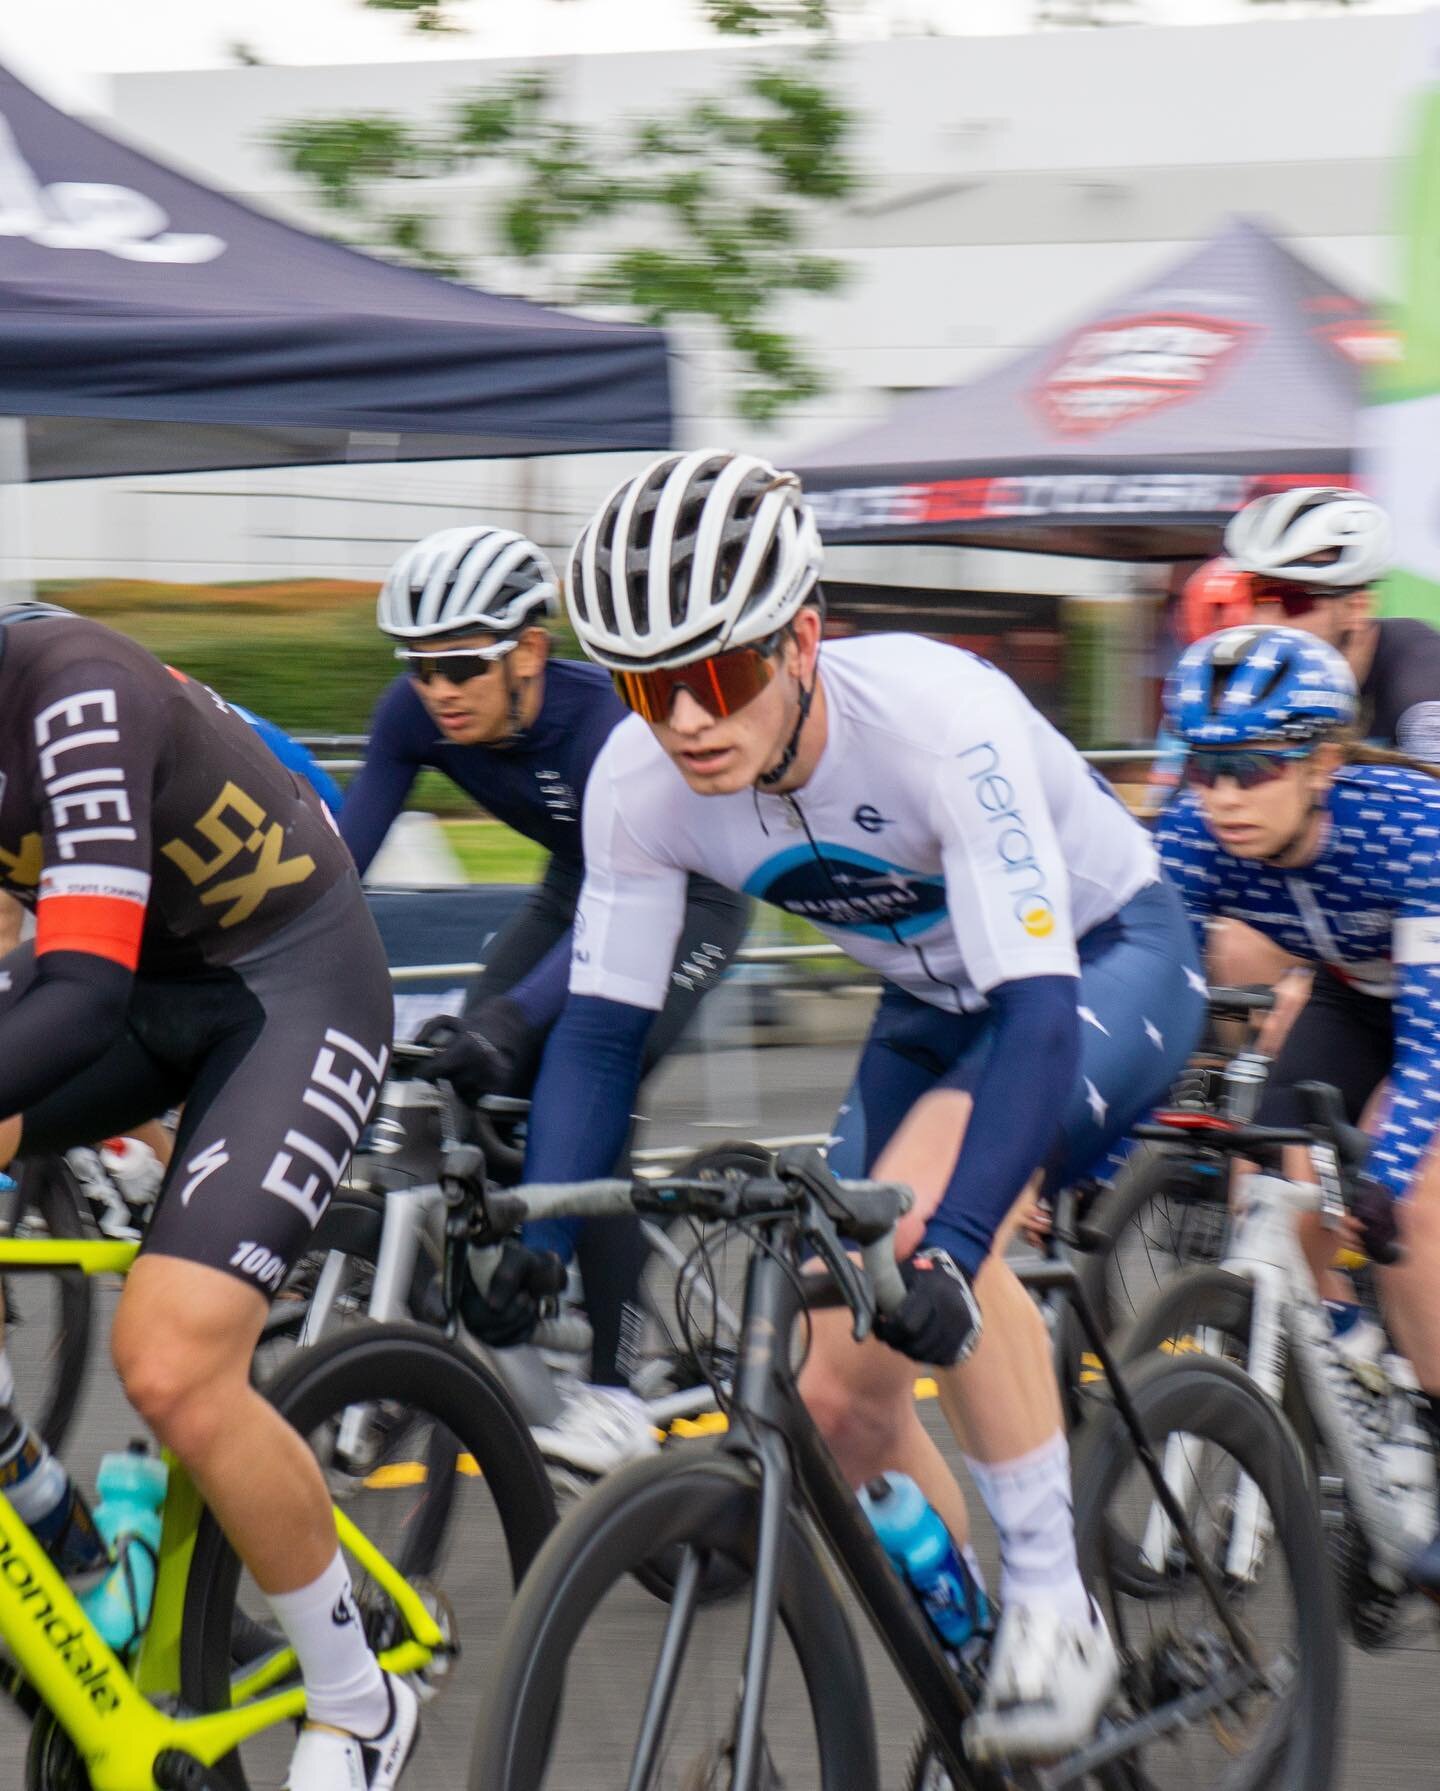 We had an absolute blast at the @uclacycling X @majesticcycling criterium last month! Since many of our team members are graduate students at UCLA, we felt a sense of pride knowing they had a hand in making this awesome day happen! Here&rsquo;s @fire